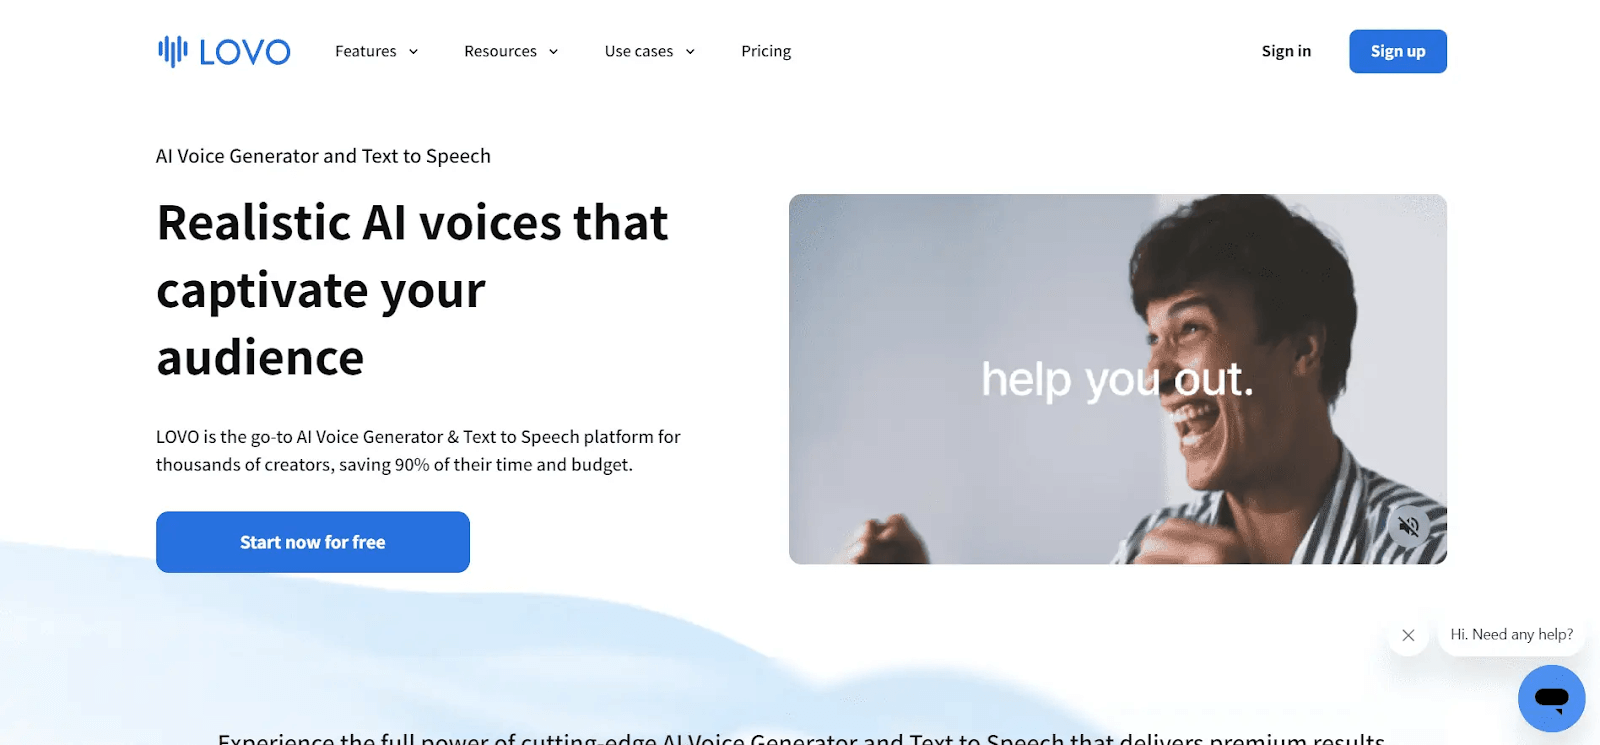 LOVO is one of popular AI voice generator tools